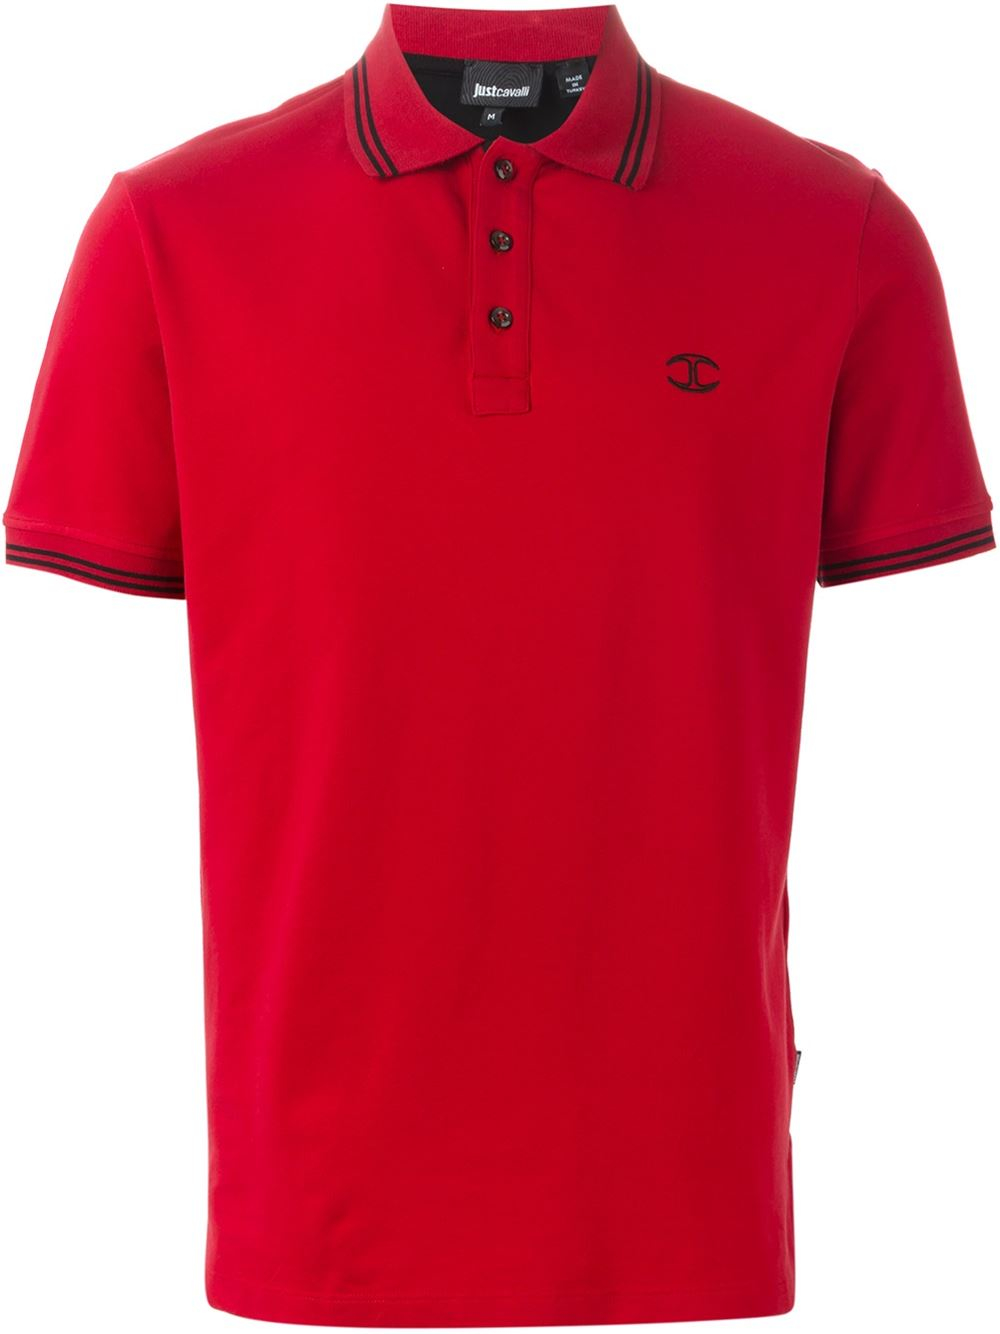 Just Cavalli Short Sleeve Polo Shirt in Red for Men - Lyst